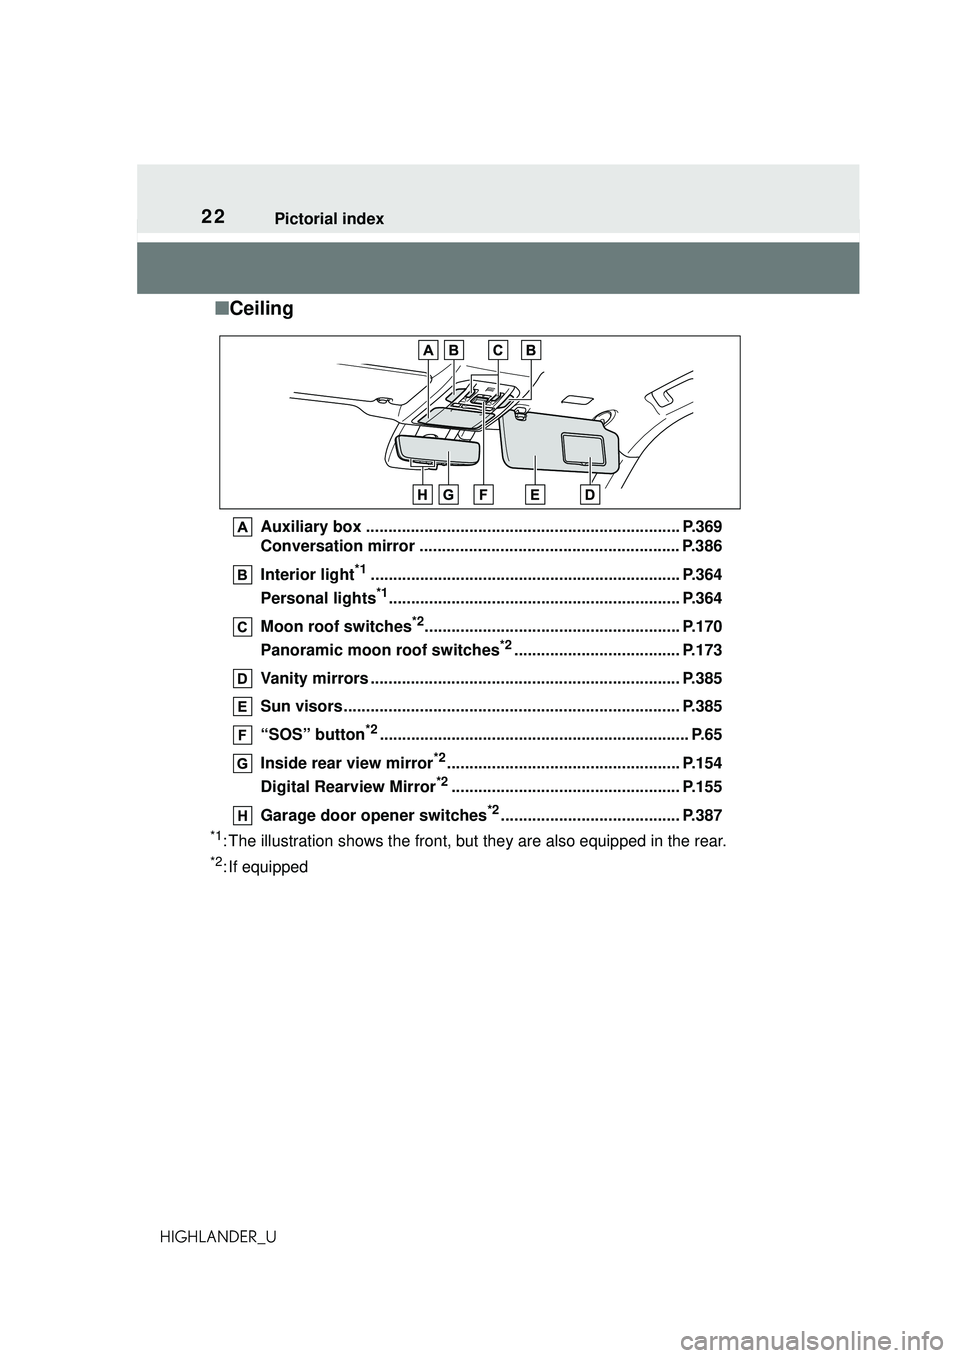 TOYOTA HIGHLANDER 2021  Owners Manual (in English) 22Pictorial index
HIGHLANDER_U
■Ceiling
Auxiliary box ...................................................................... P.369
Conversation mirror ...............................................